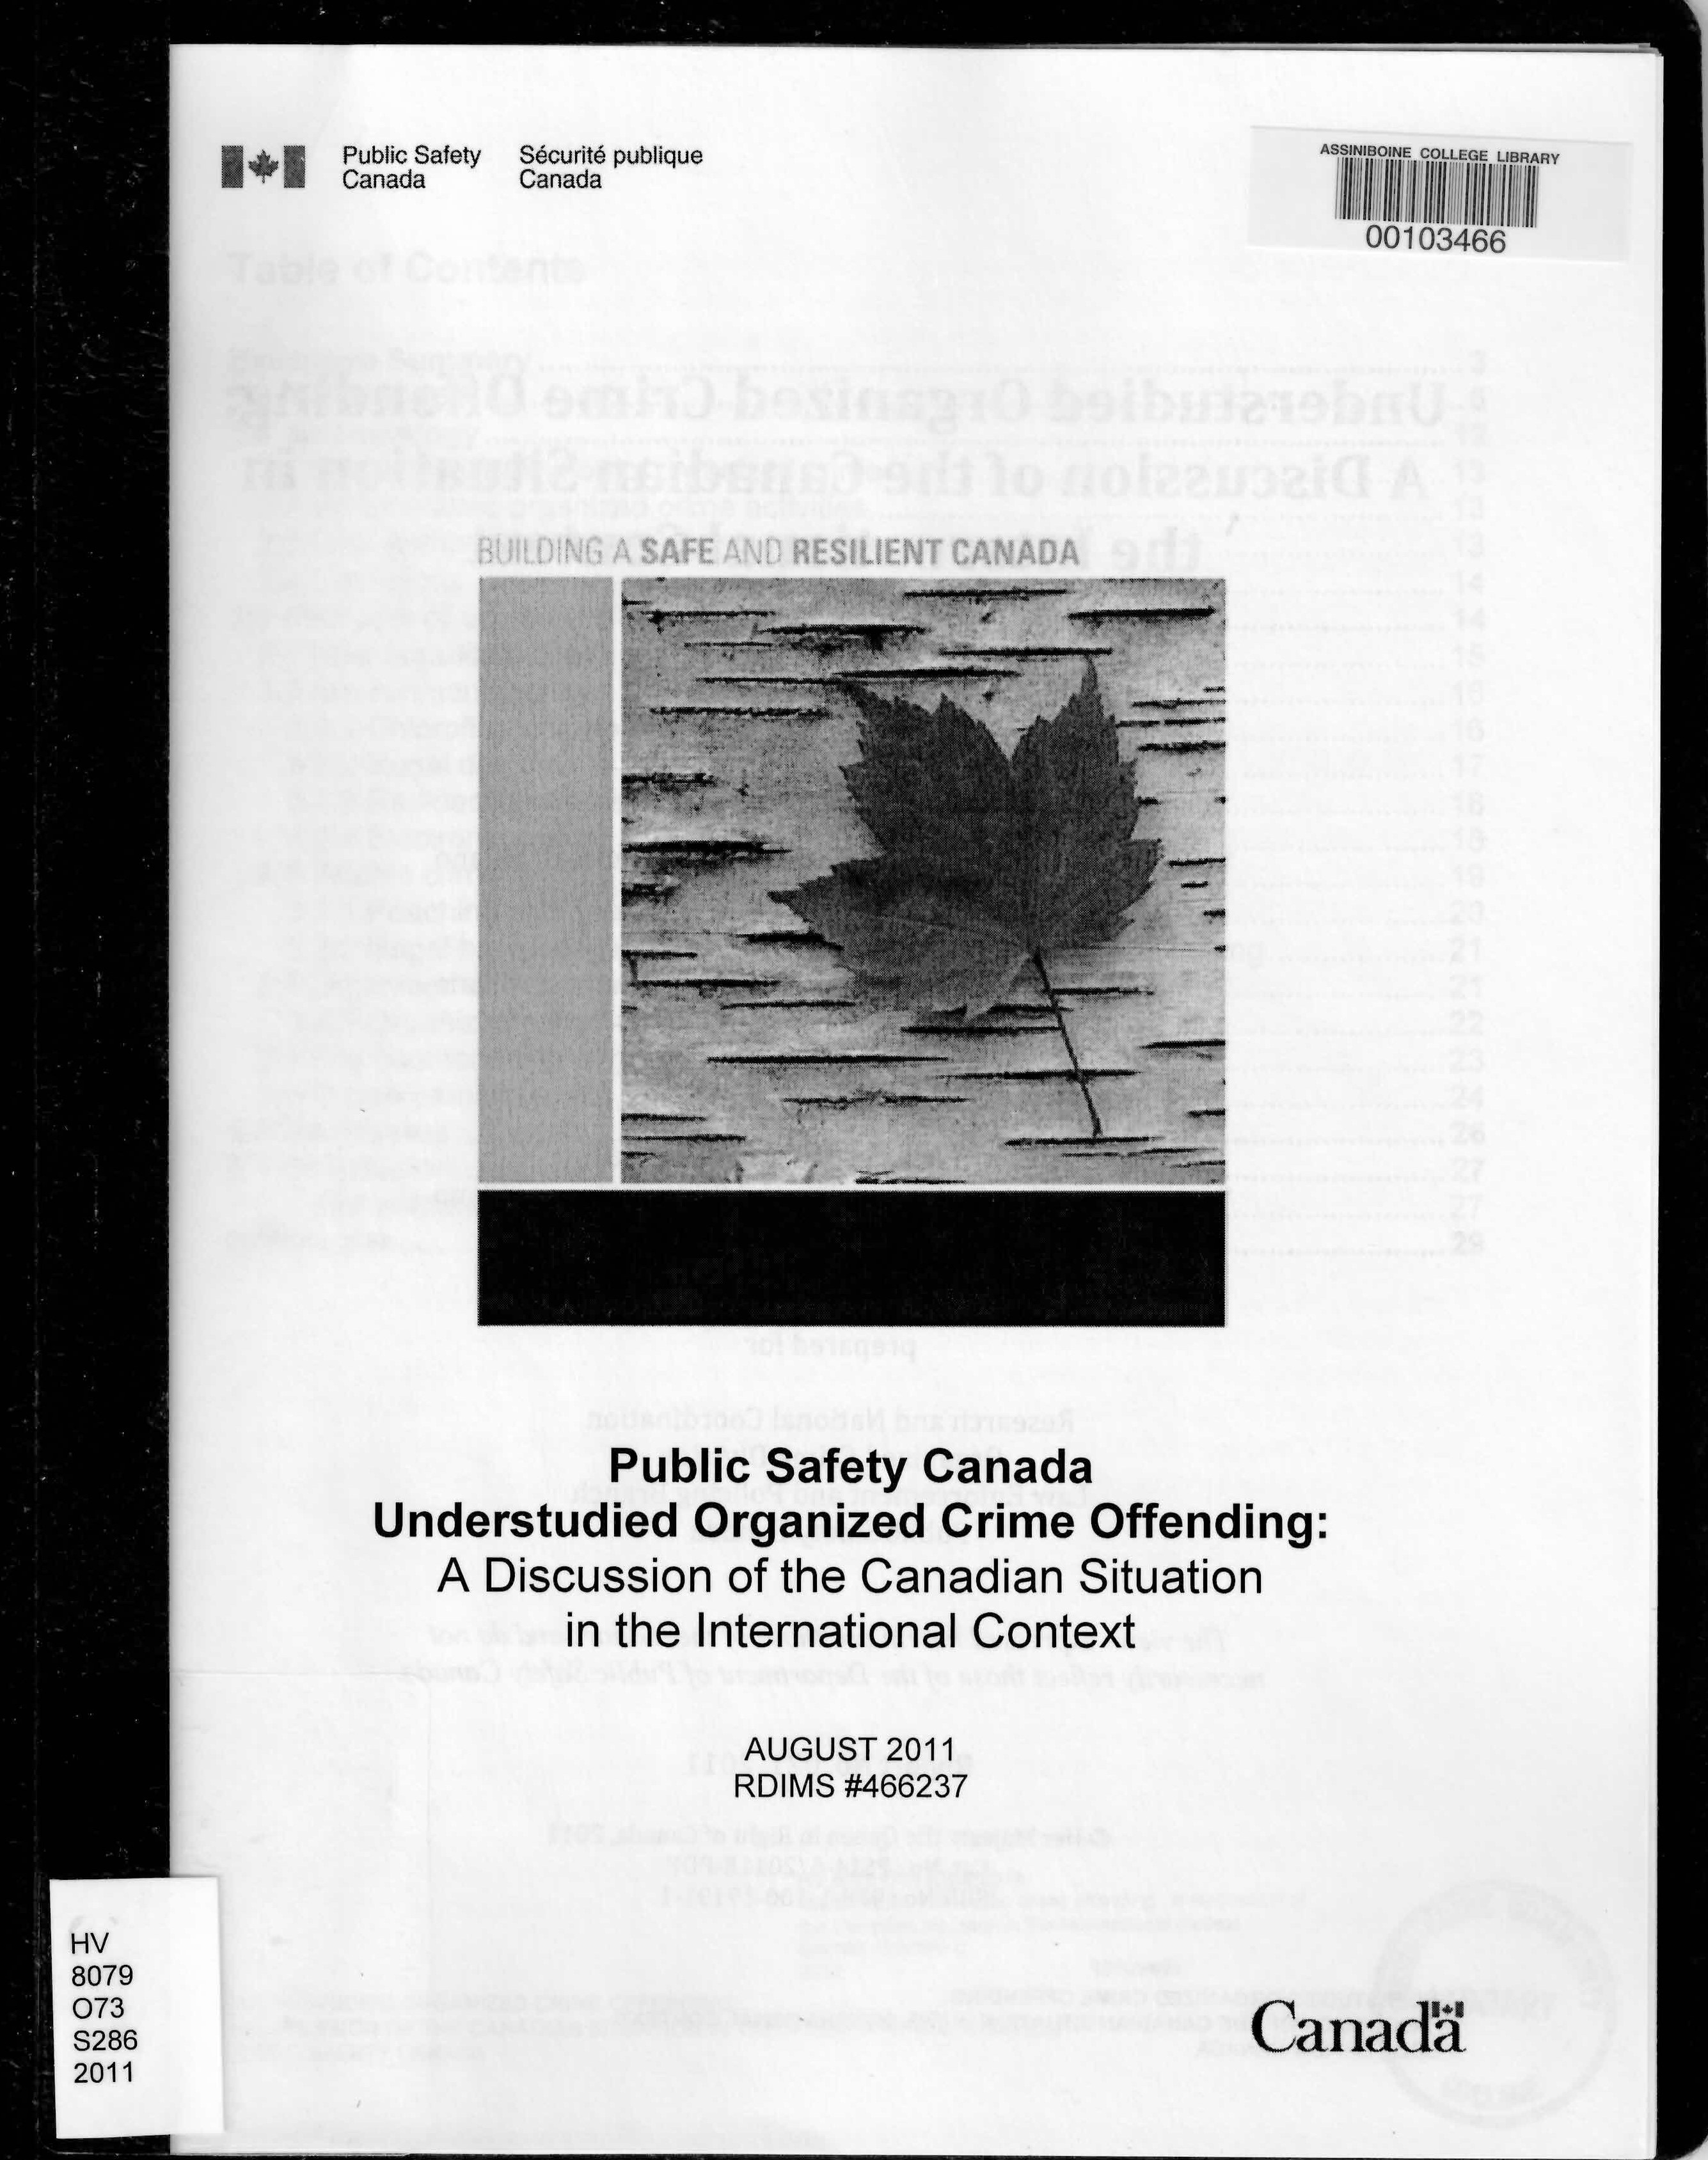 Understudied organized crime offending : a discussion of the Canadian situation in the international context